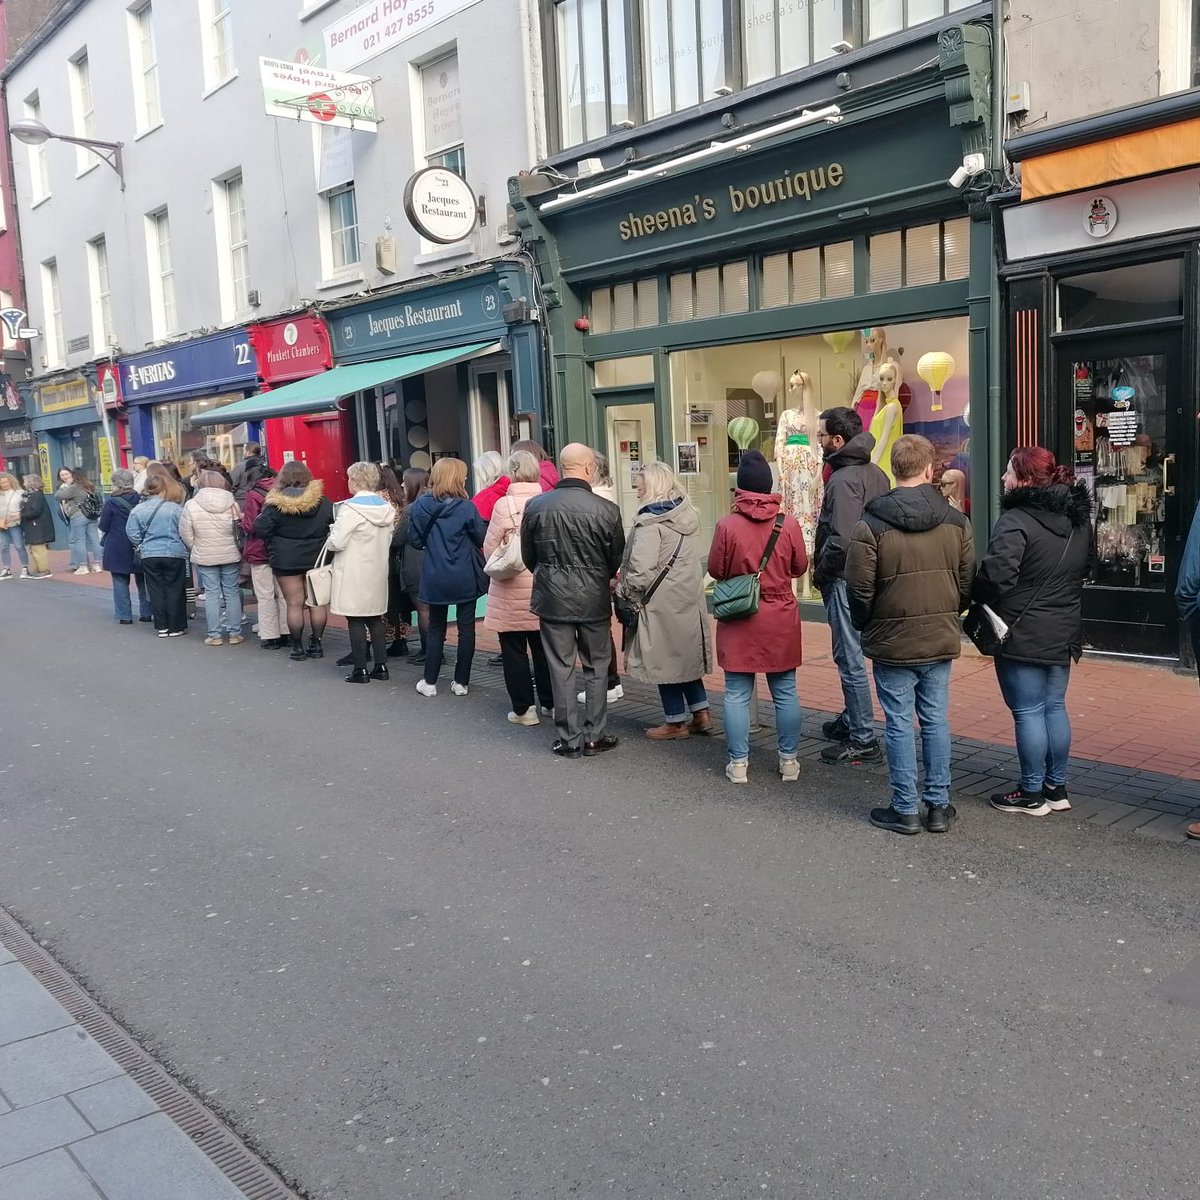 It was daunting, but super energising to do 2 @SeedTalks this wk on 'The Science of Intergenerational Trauma'. Circa 450 people came! A pal sent me a photo of the queue for Cypress Avenue in Cork yest eve. Amazing! Clearly, there is an appetite for info on #healing. #ubuntu #love